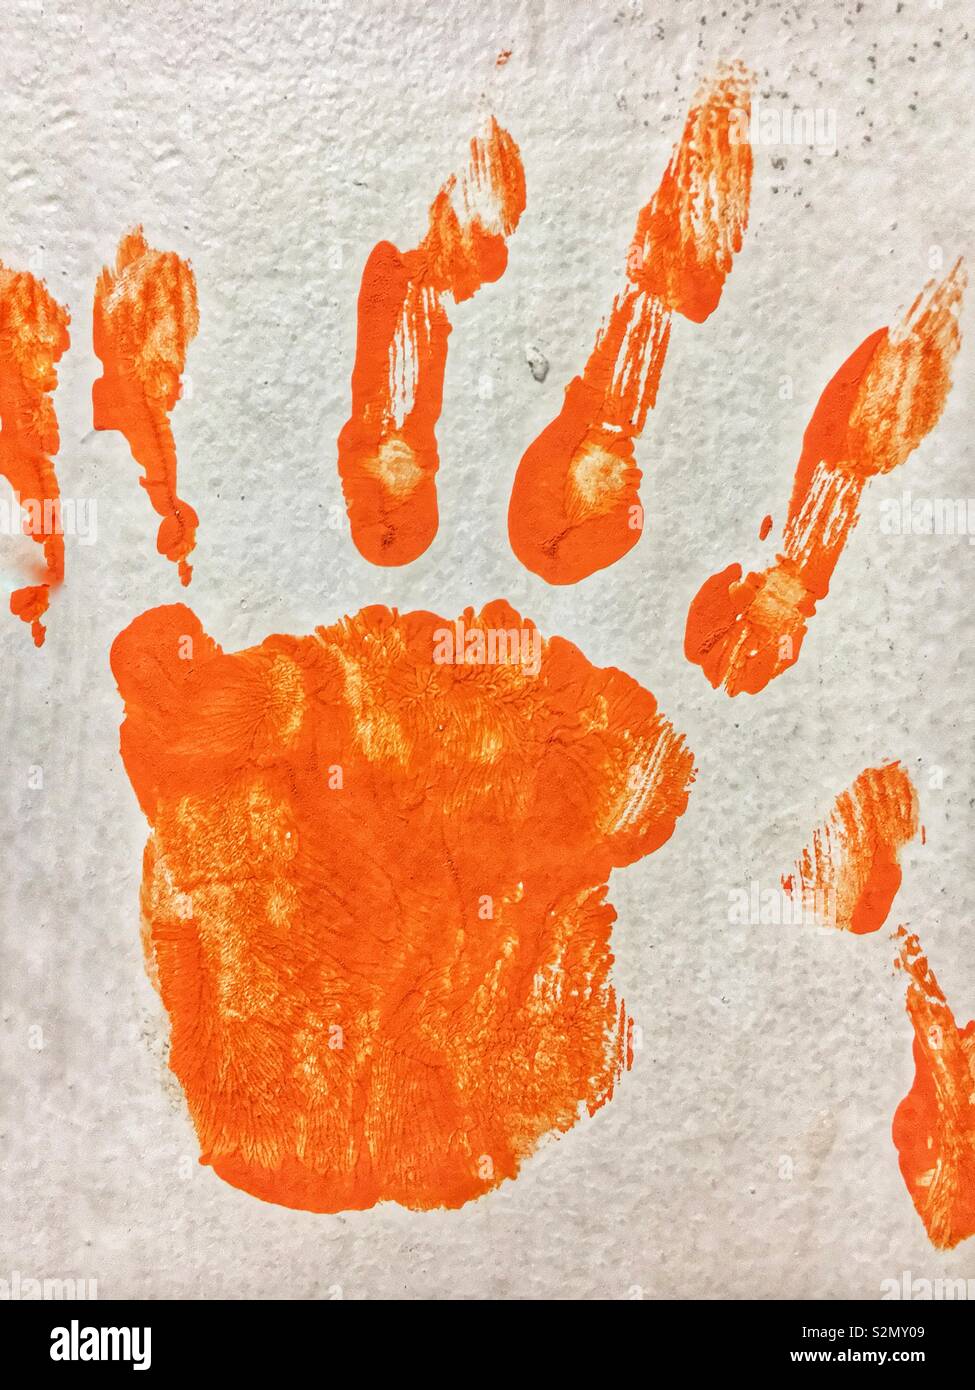 Child’s left hand print in orange paint using hand painting techniques. Stock Photo